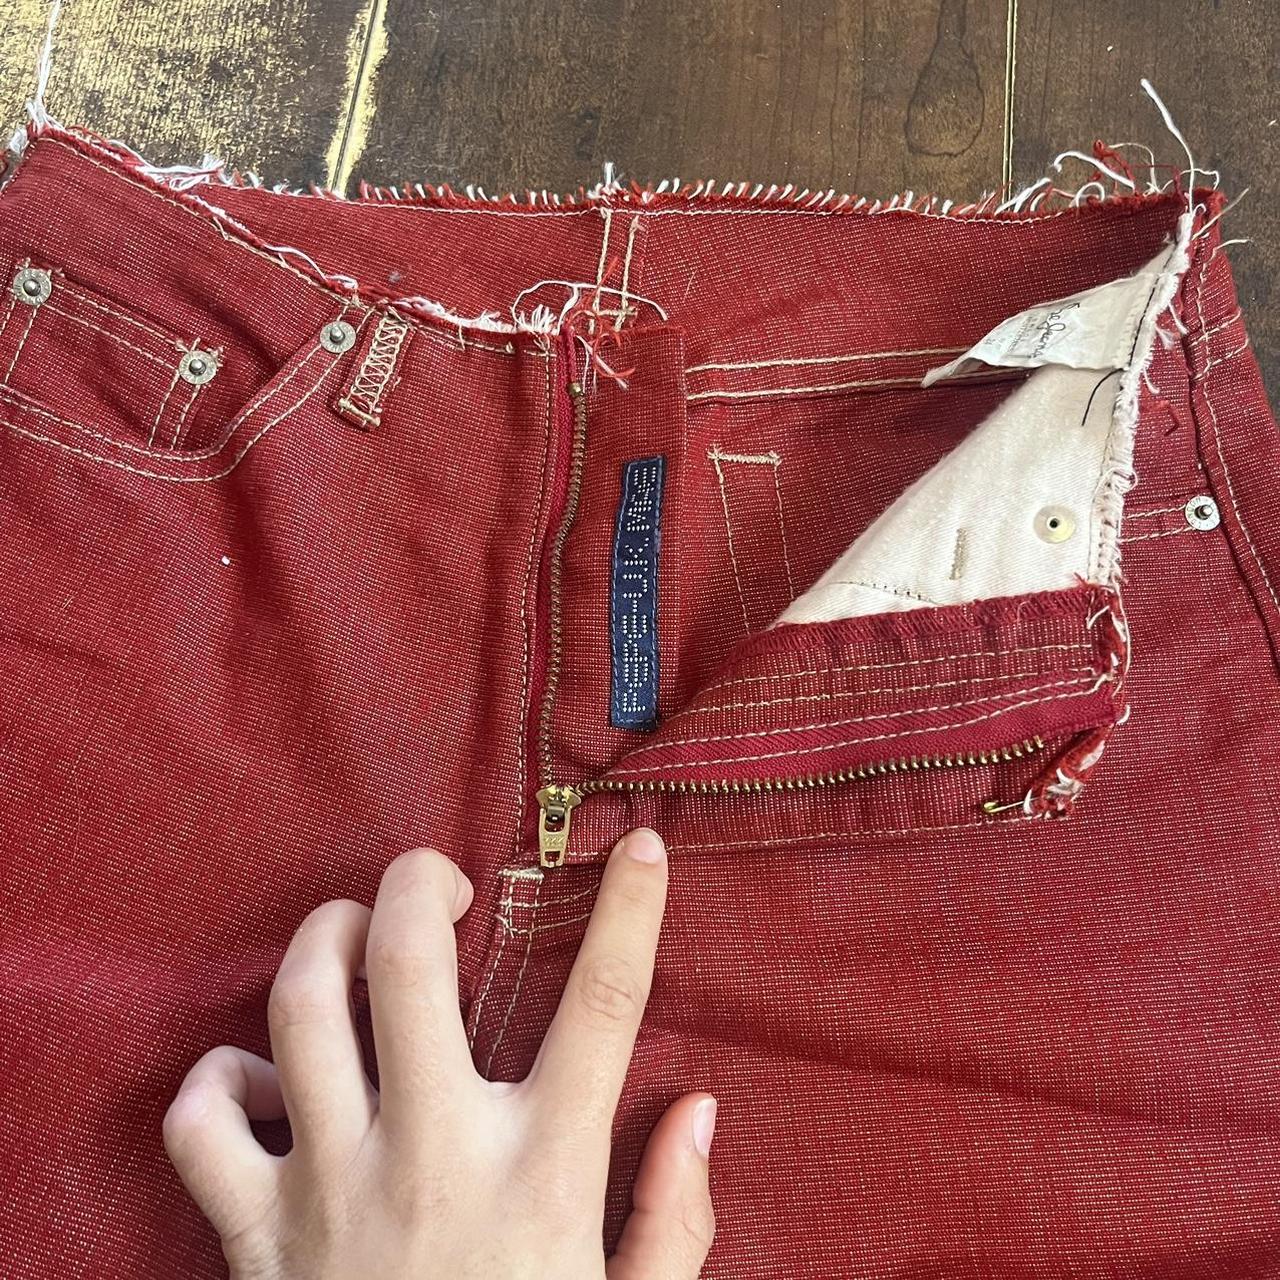 Pepe Jeans Women's Red Jeans (4)